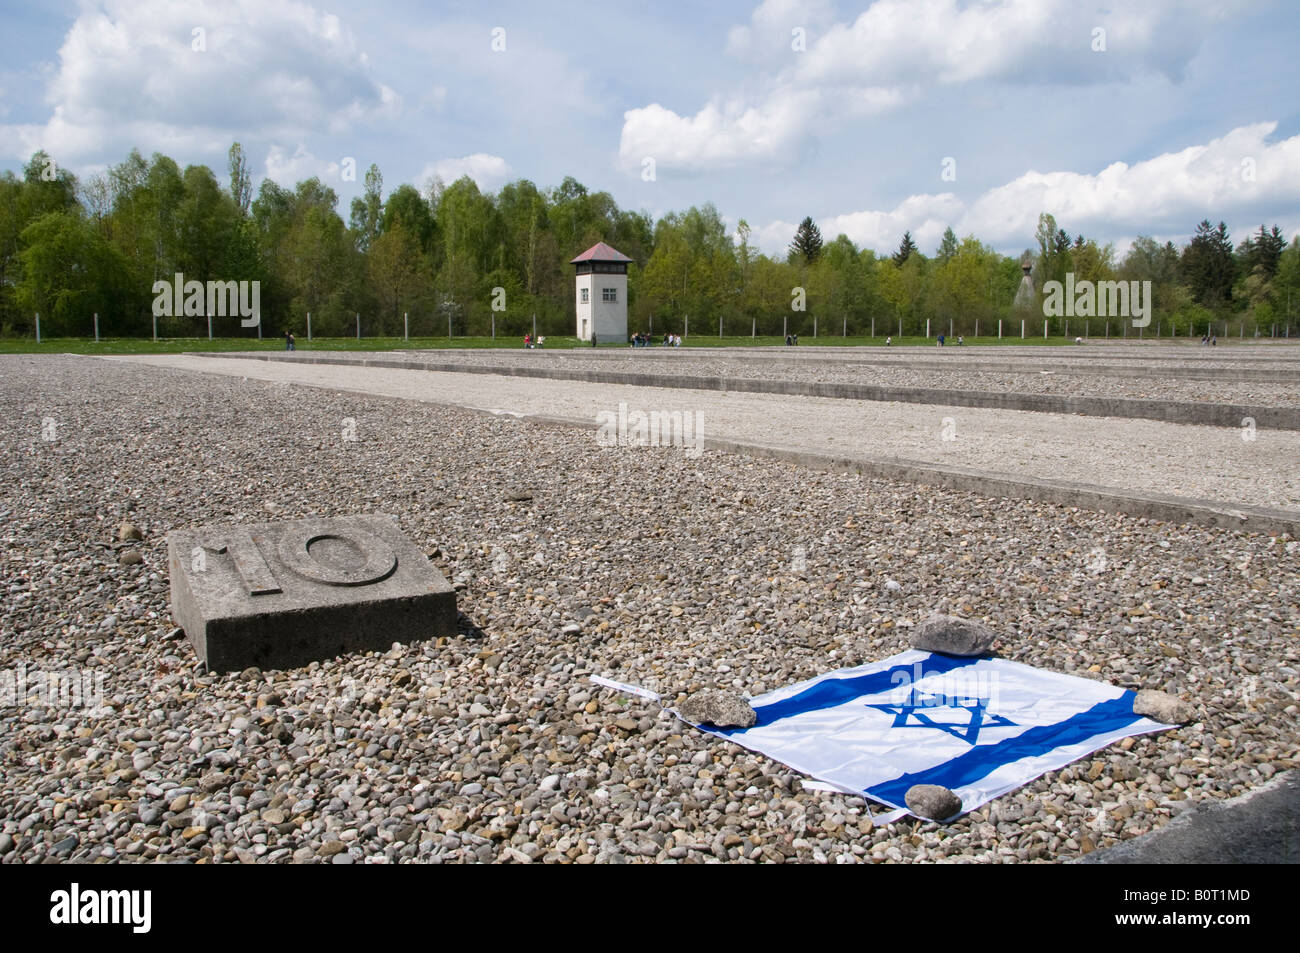 Israeli flag with a marker where prisoners barrack building #10 stood in Dachau concentration camp, Bavaria, Germany Stock Photo